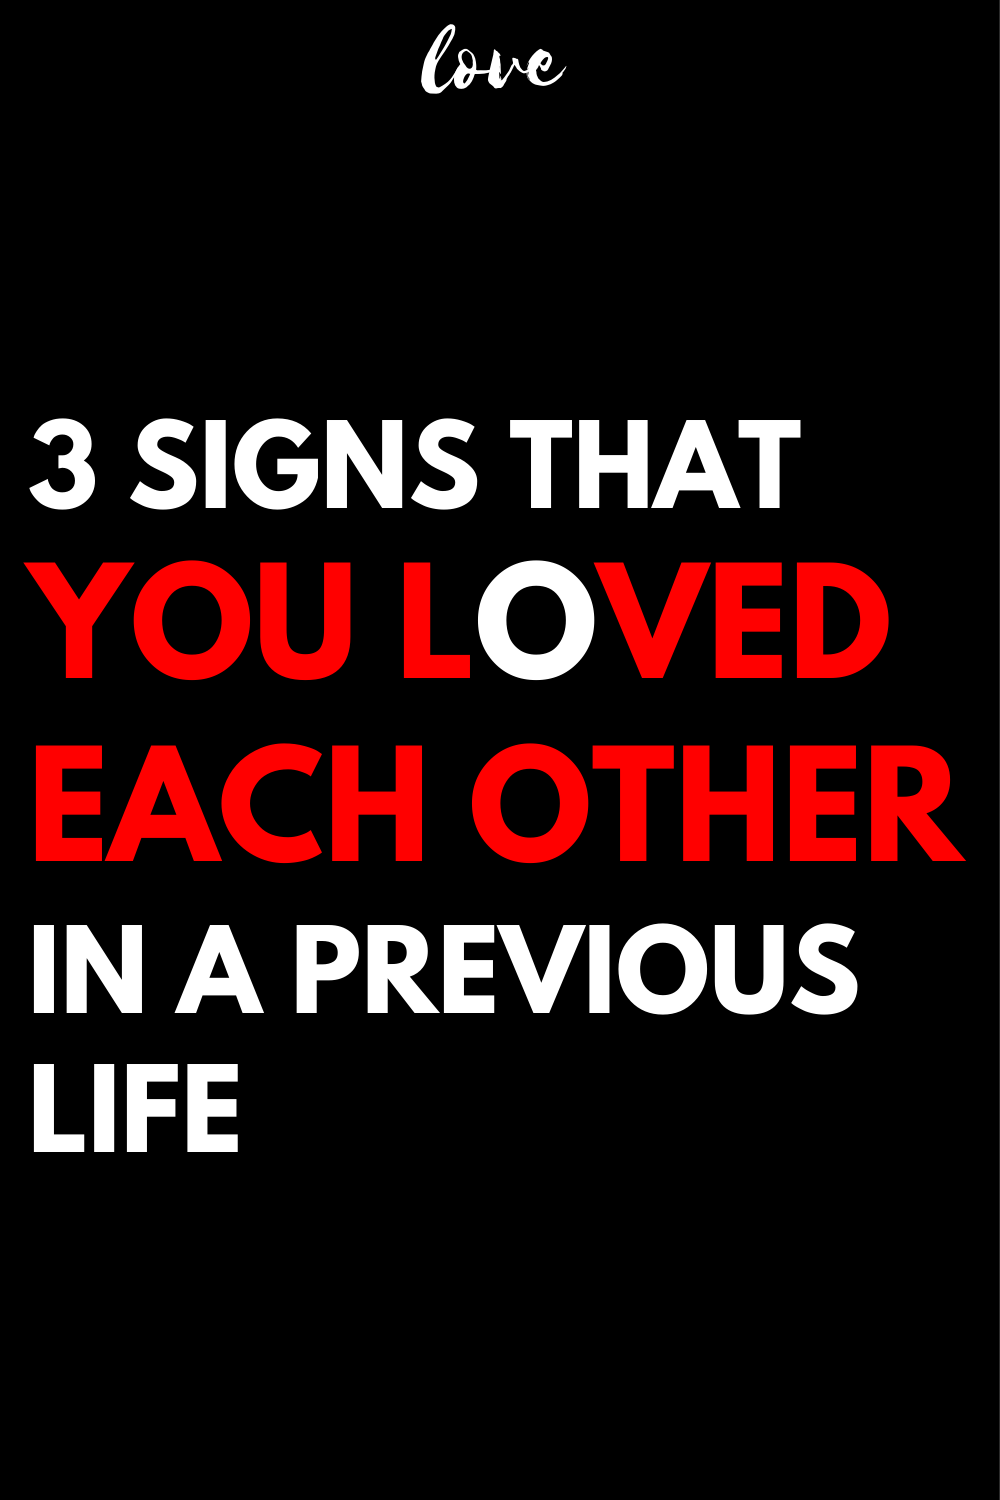 3 signs that you loved each other in a previous life